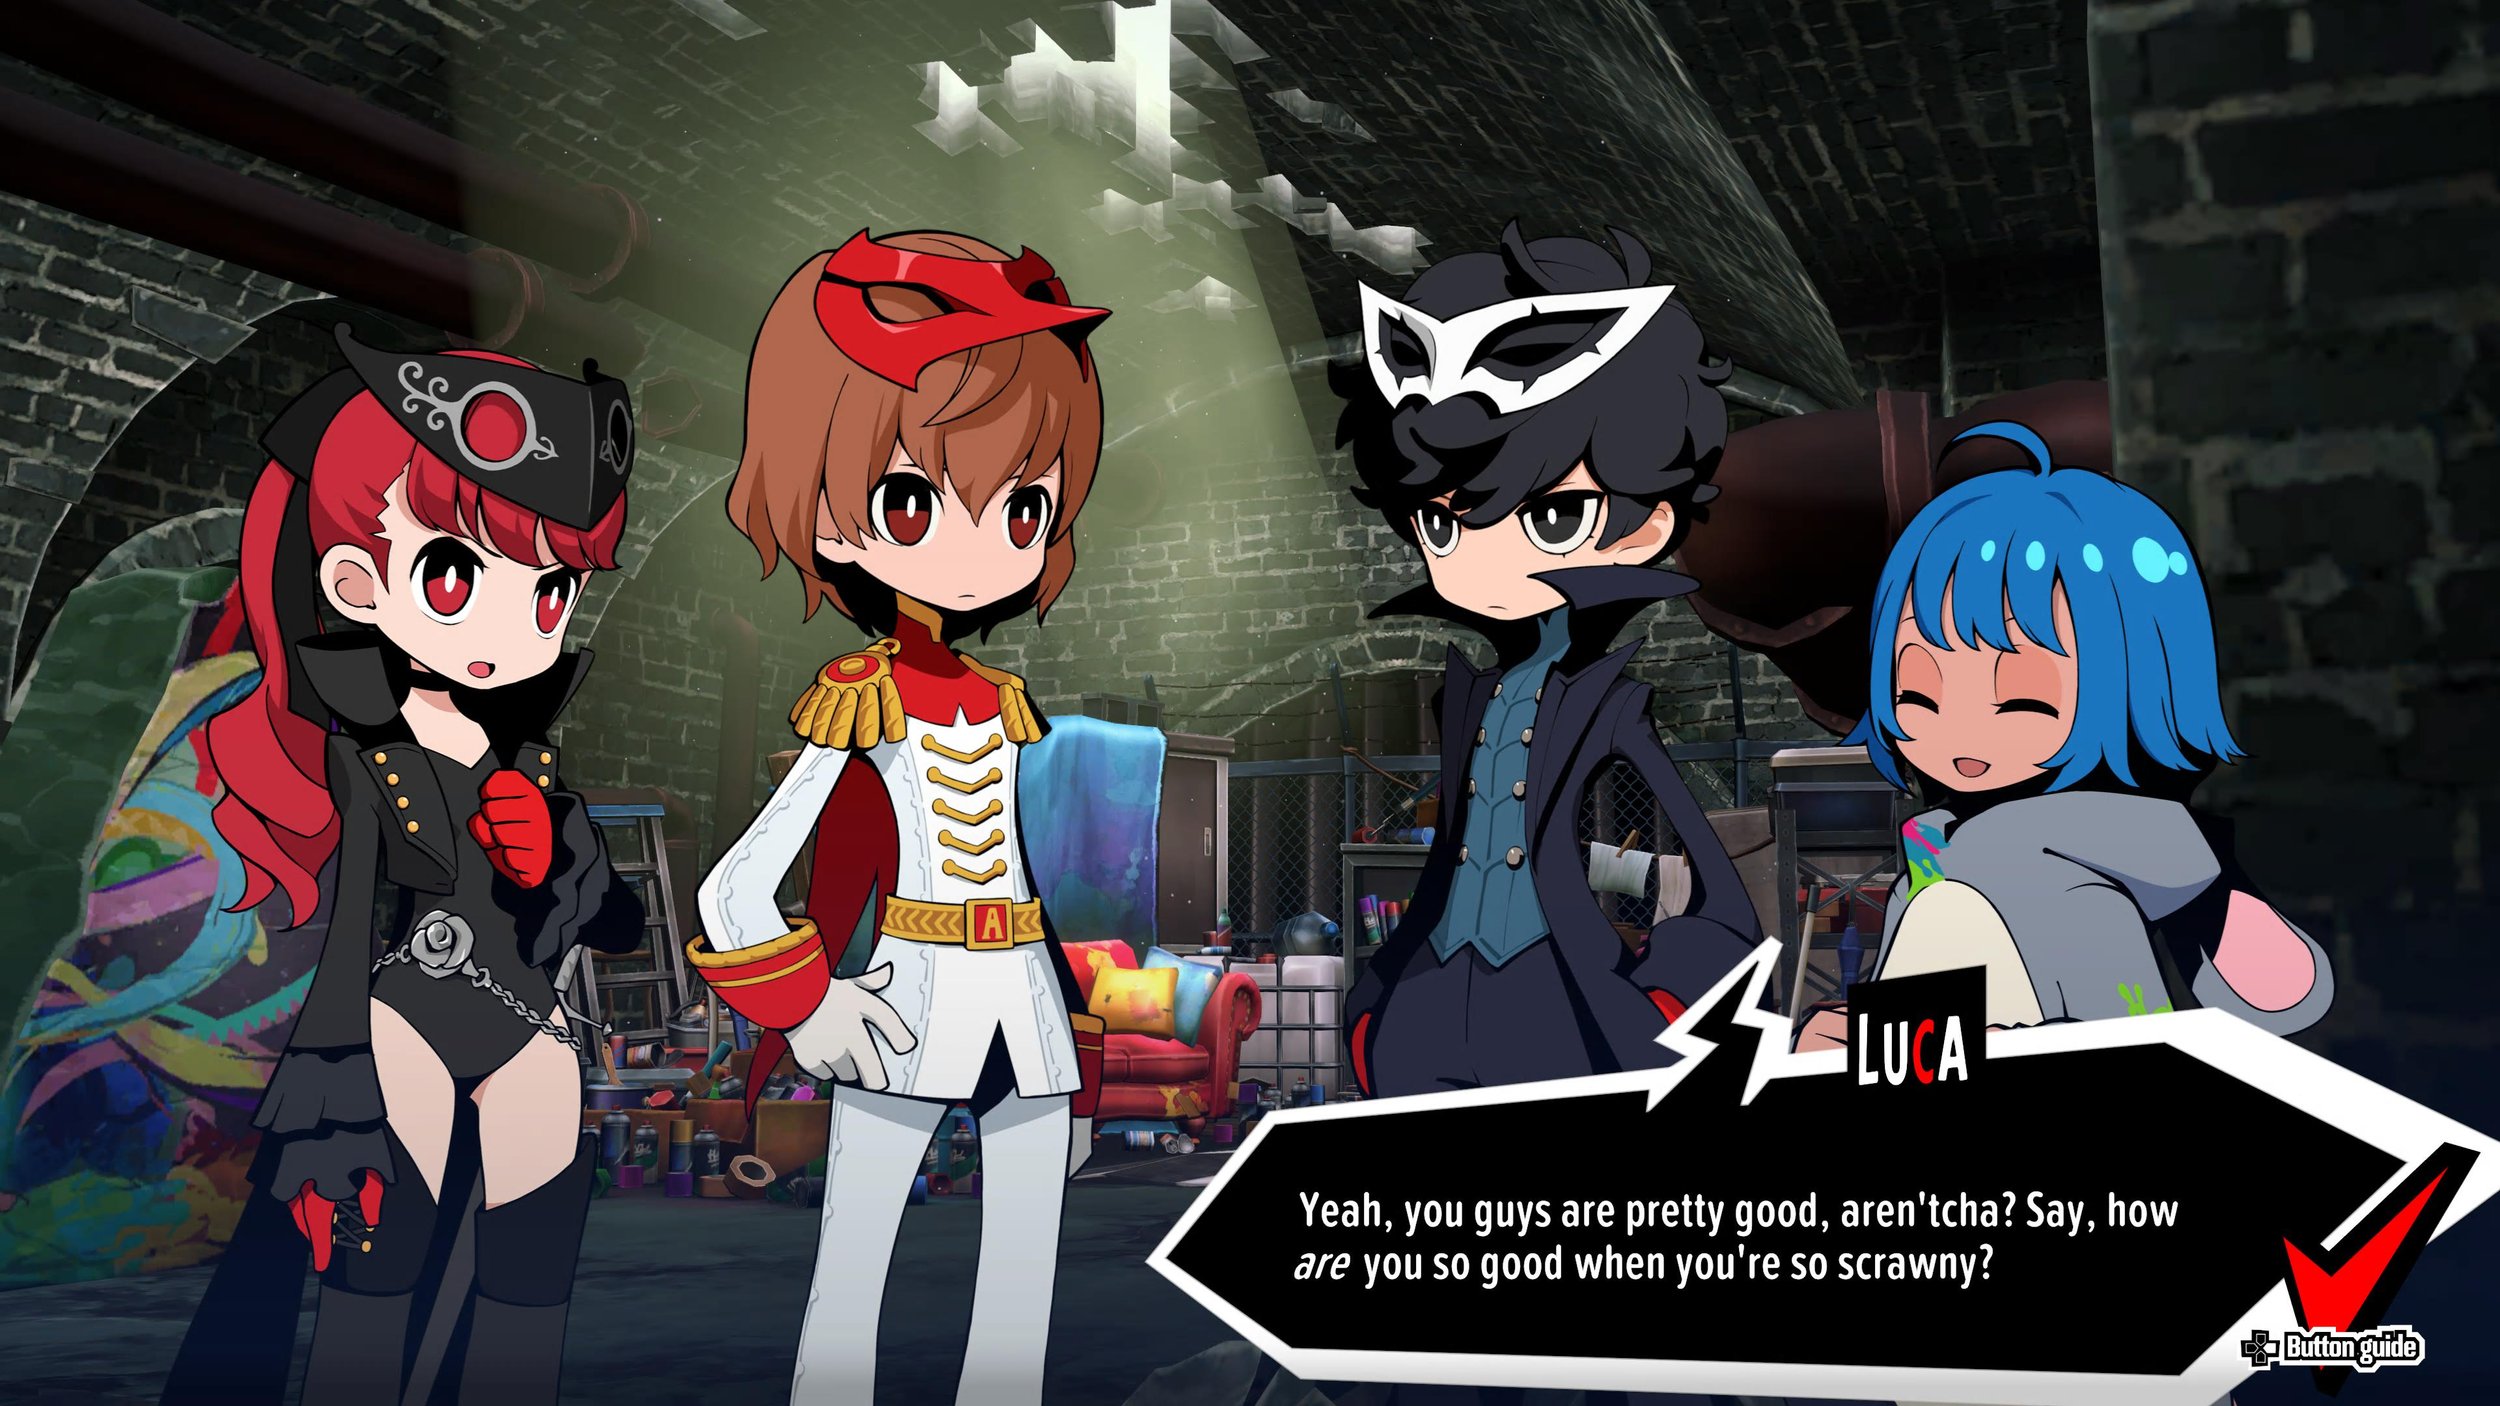 Persona 5 Tactica' tips you should know before playing